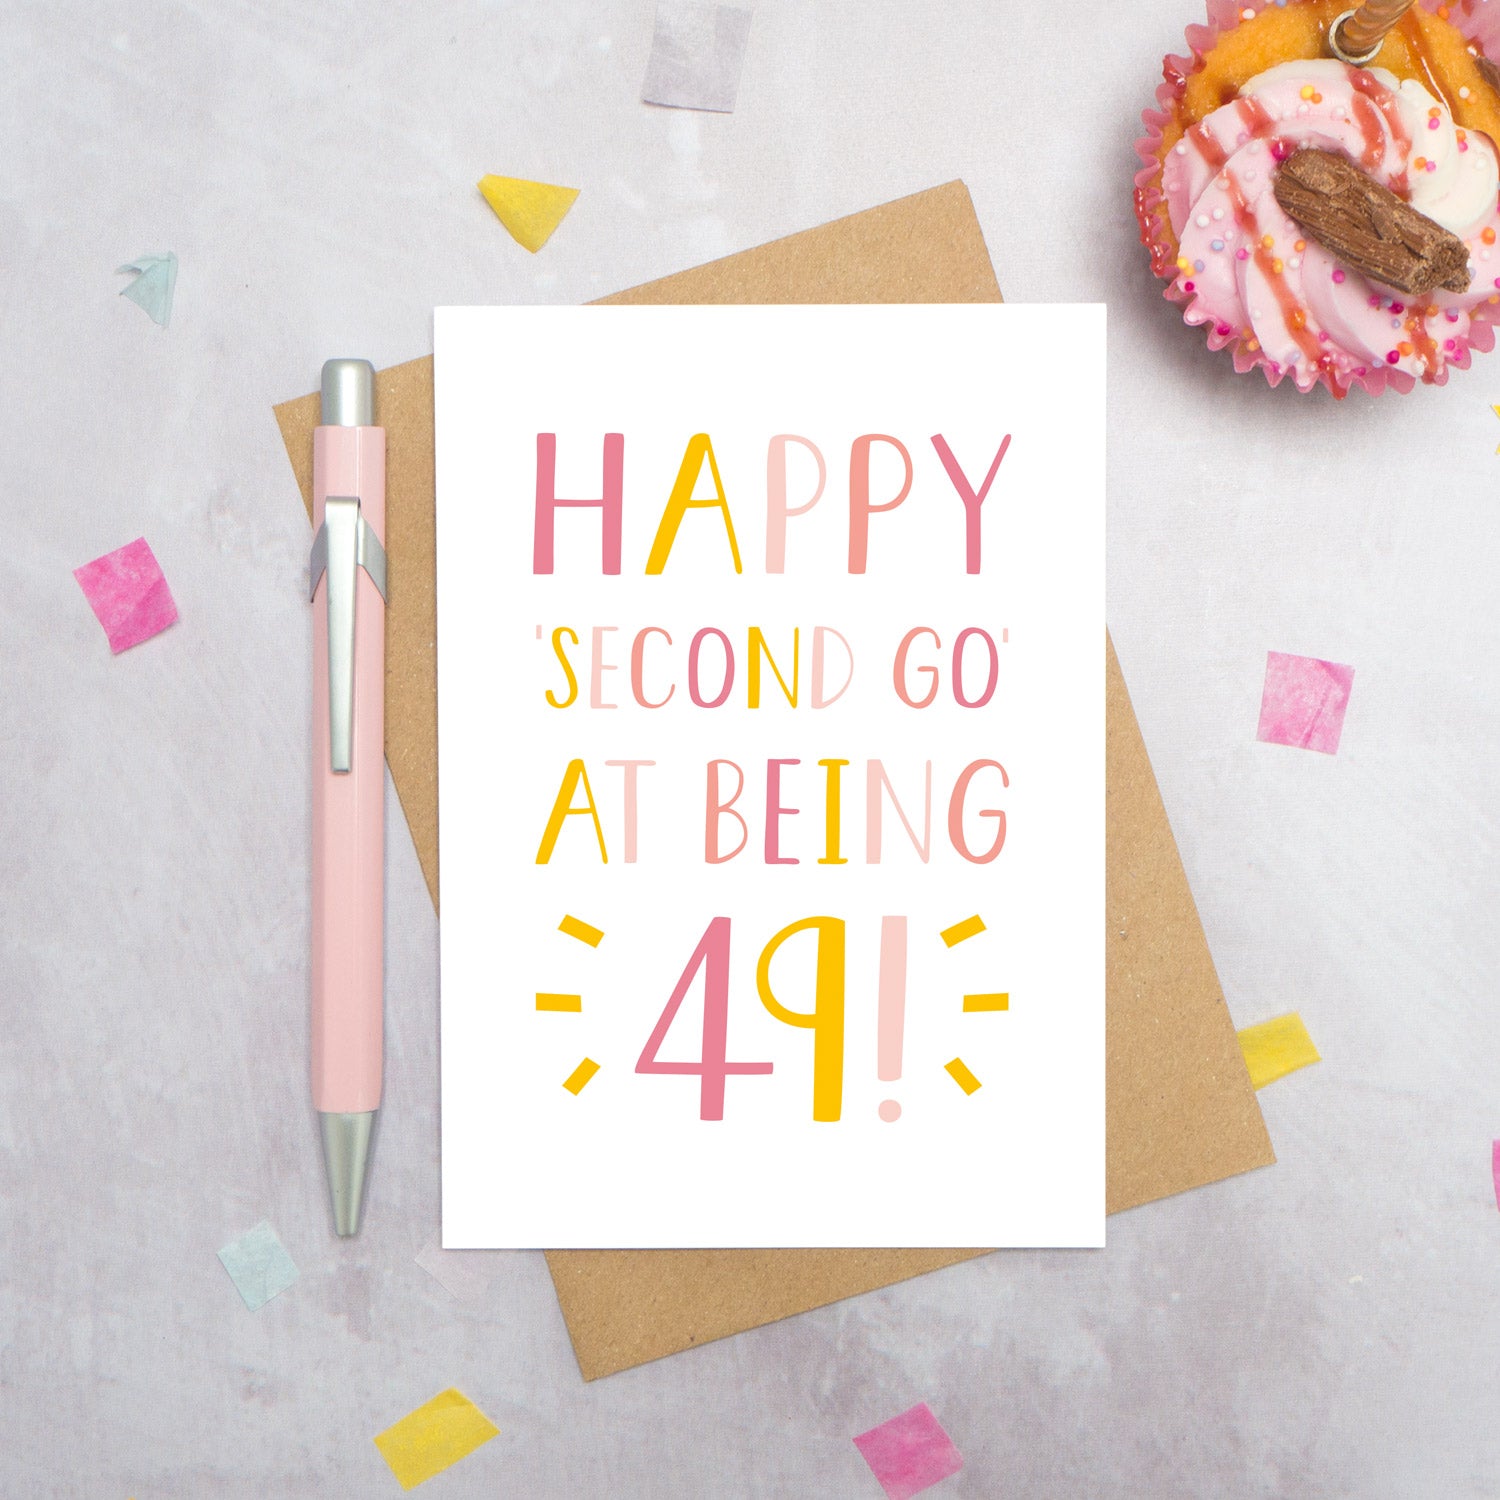 Happy second go at being 49 - milestone age card in pink photographed on a grey background surrounded by a cupcake, pen and confetti.